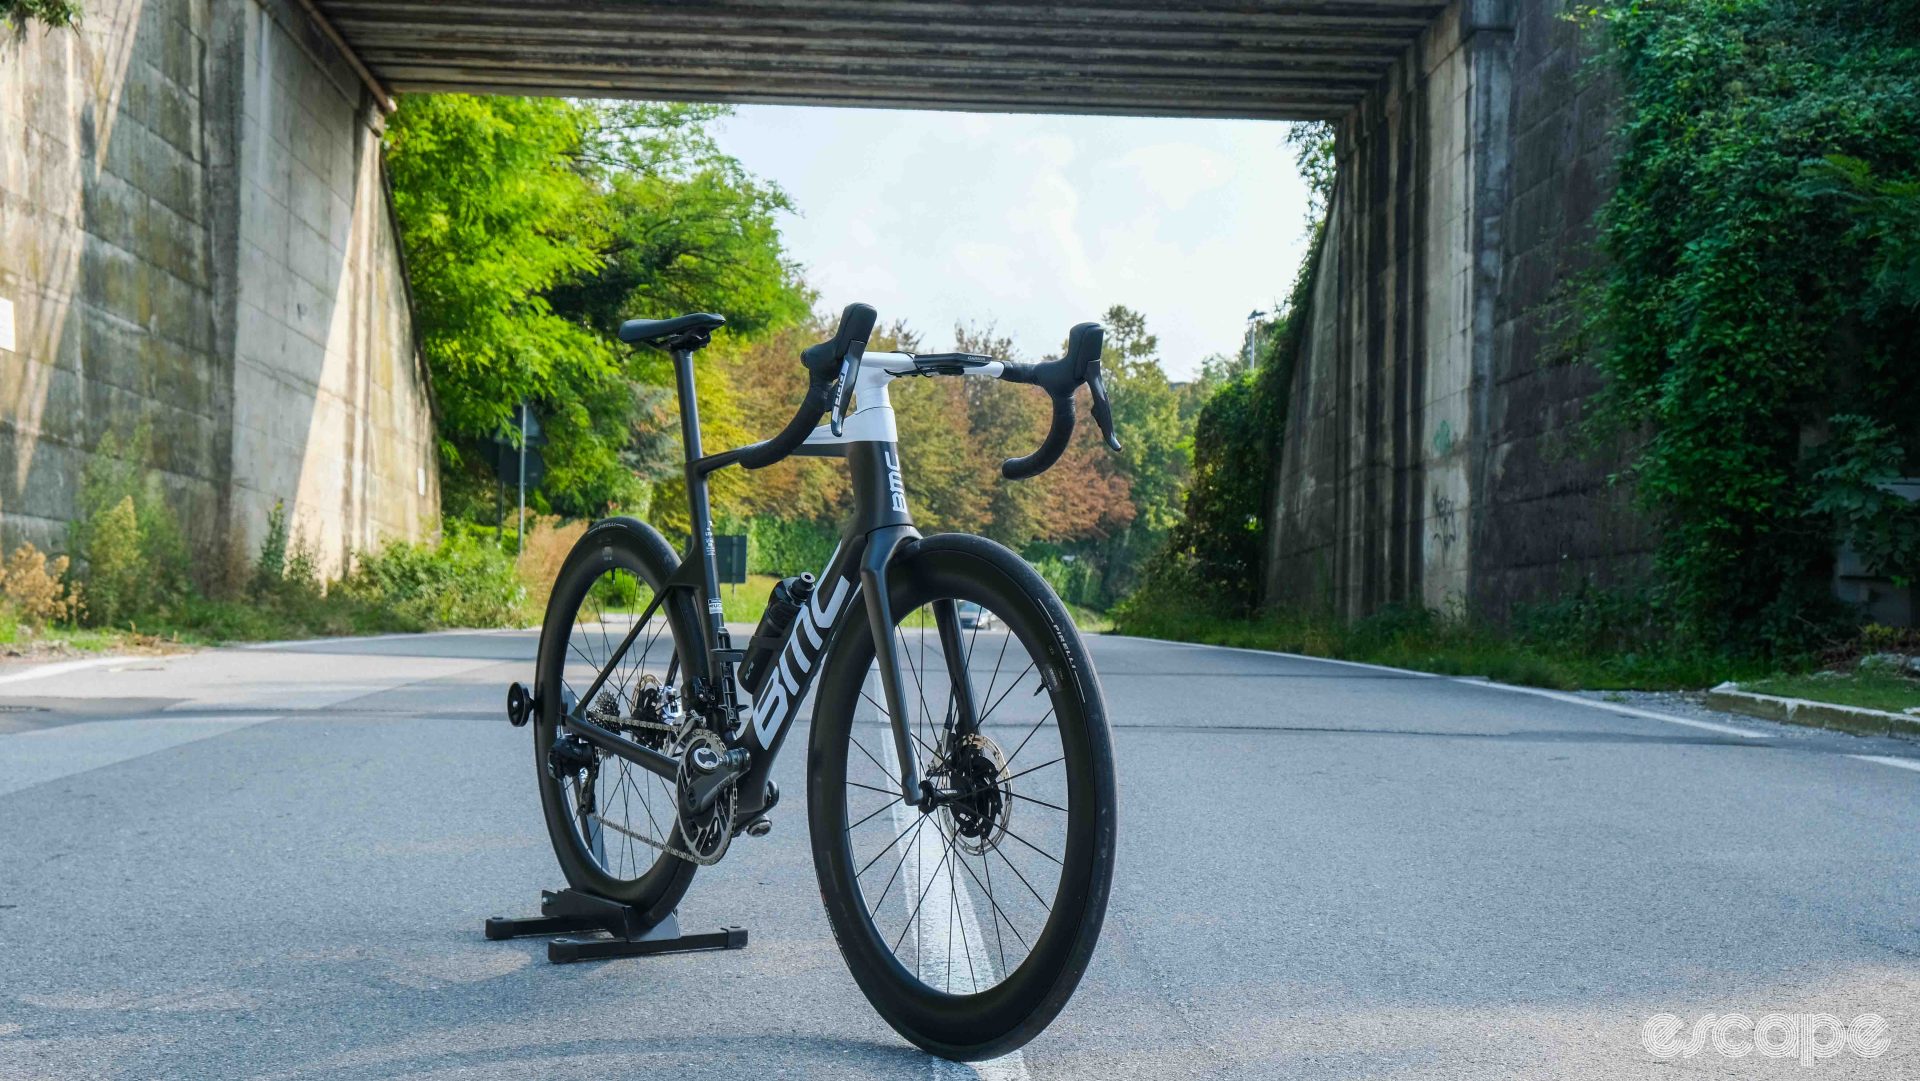 The photo shows BMC's new TeamMachine R 01 race bike viewed almost head on.